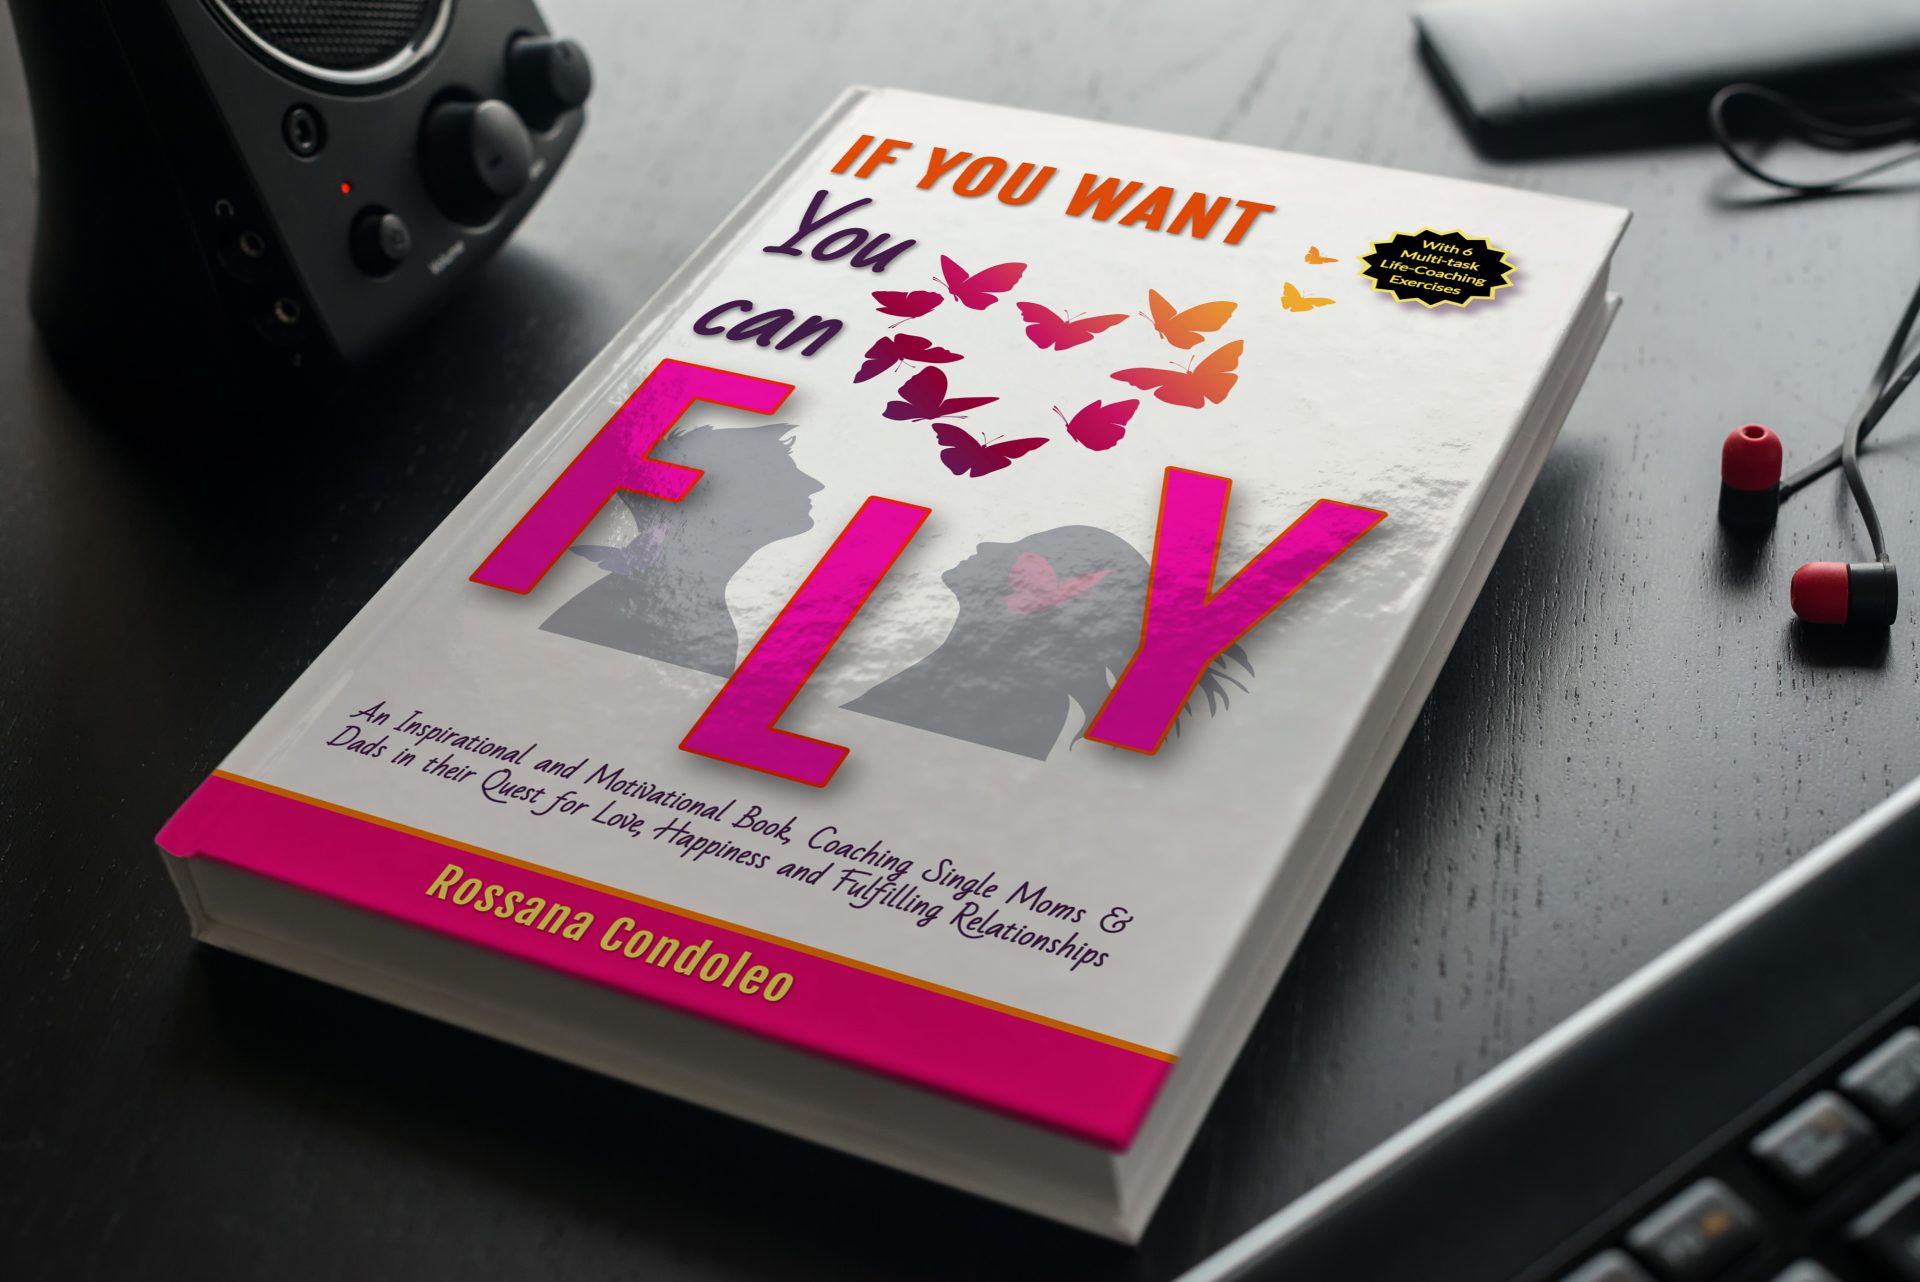 Single parent reading If You Want You Can Fly by Rossana Condoleo